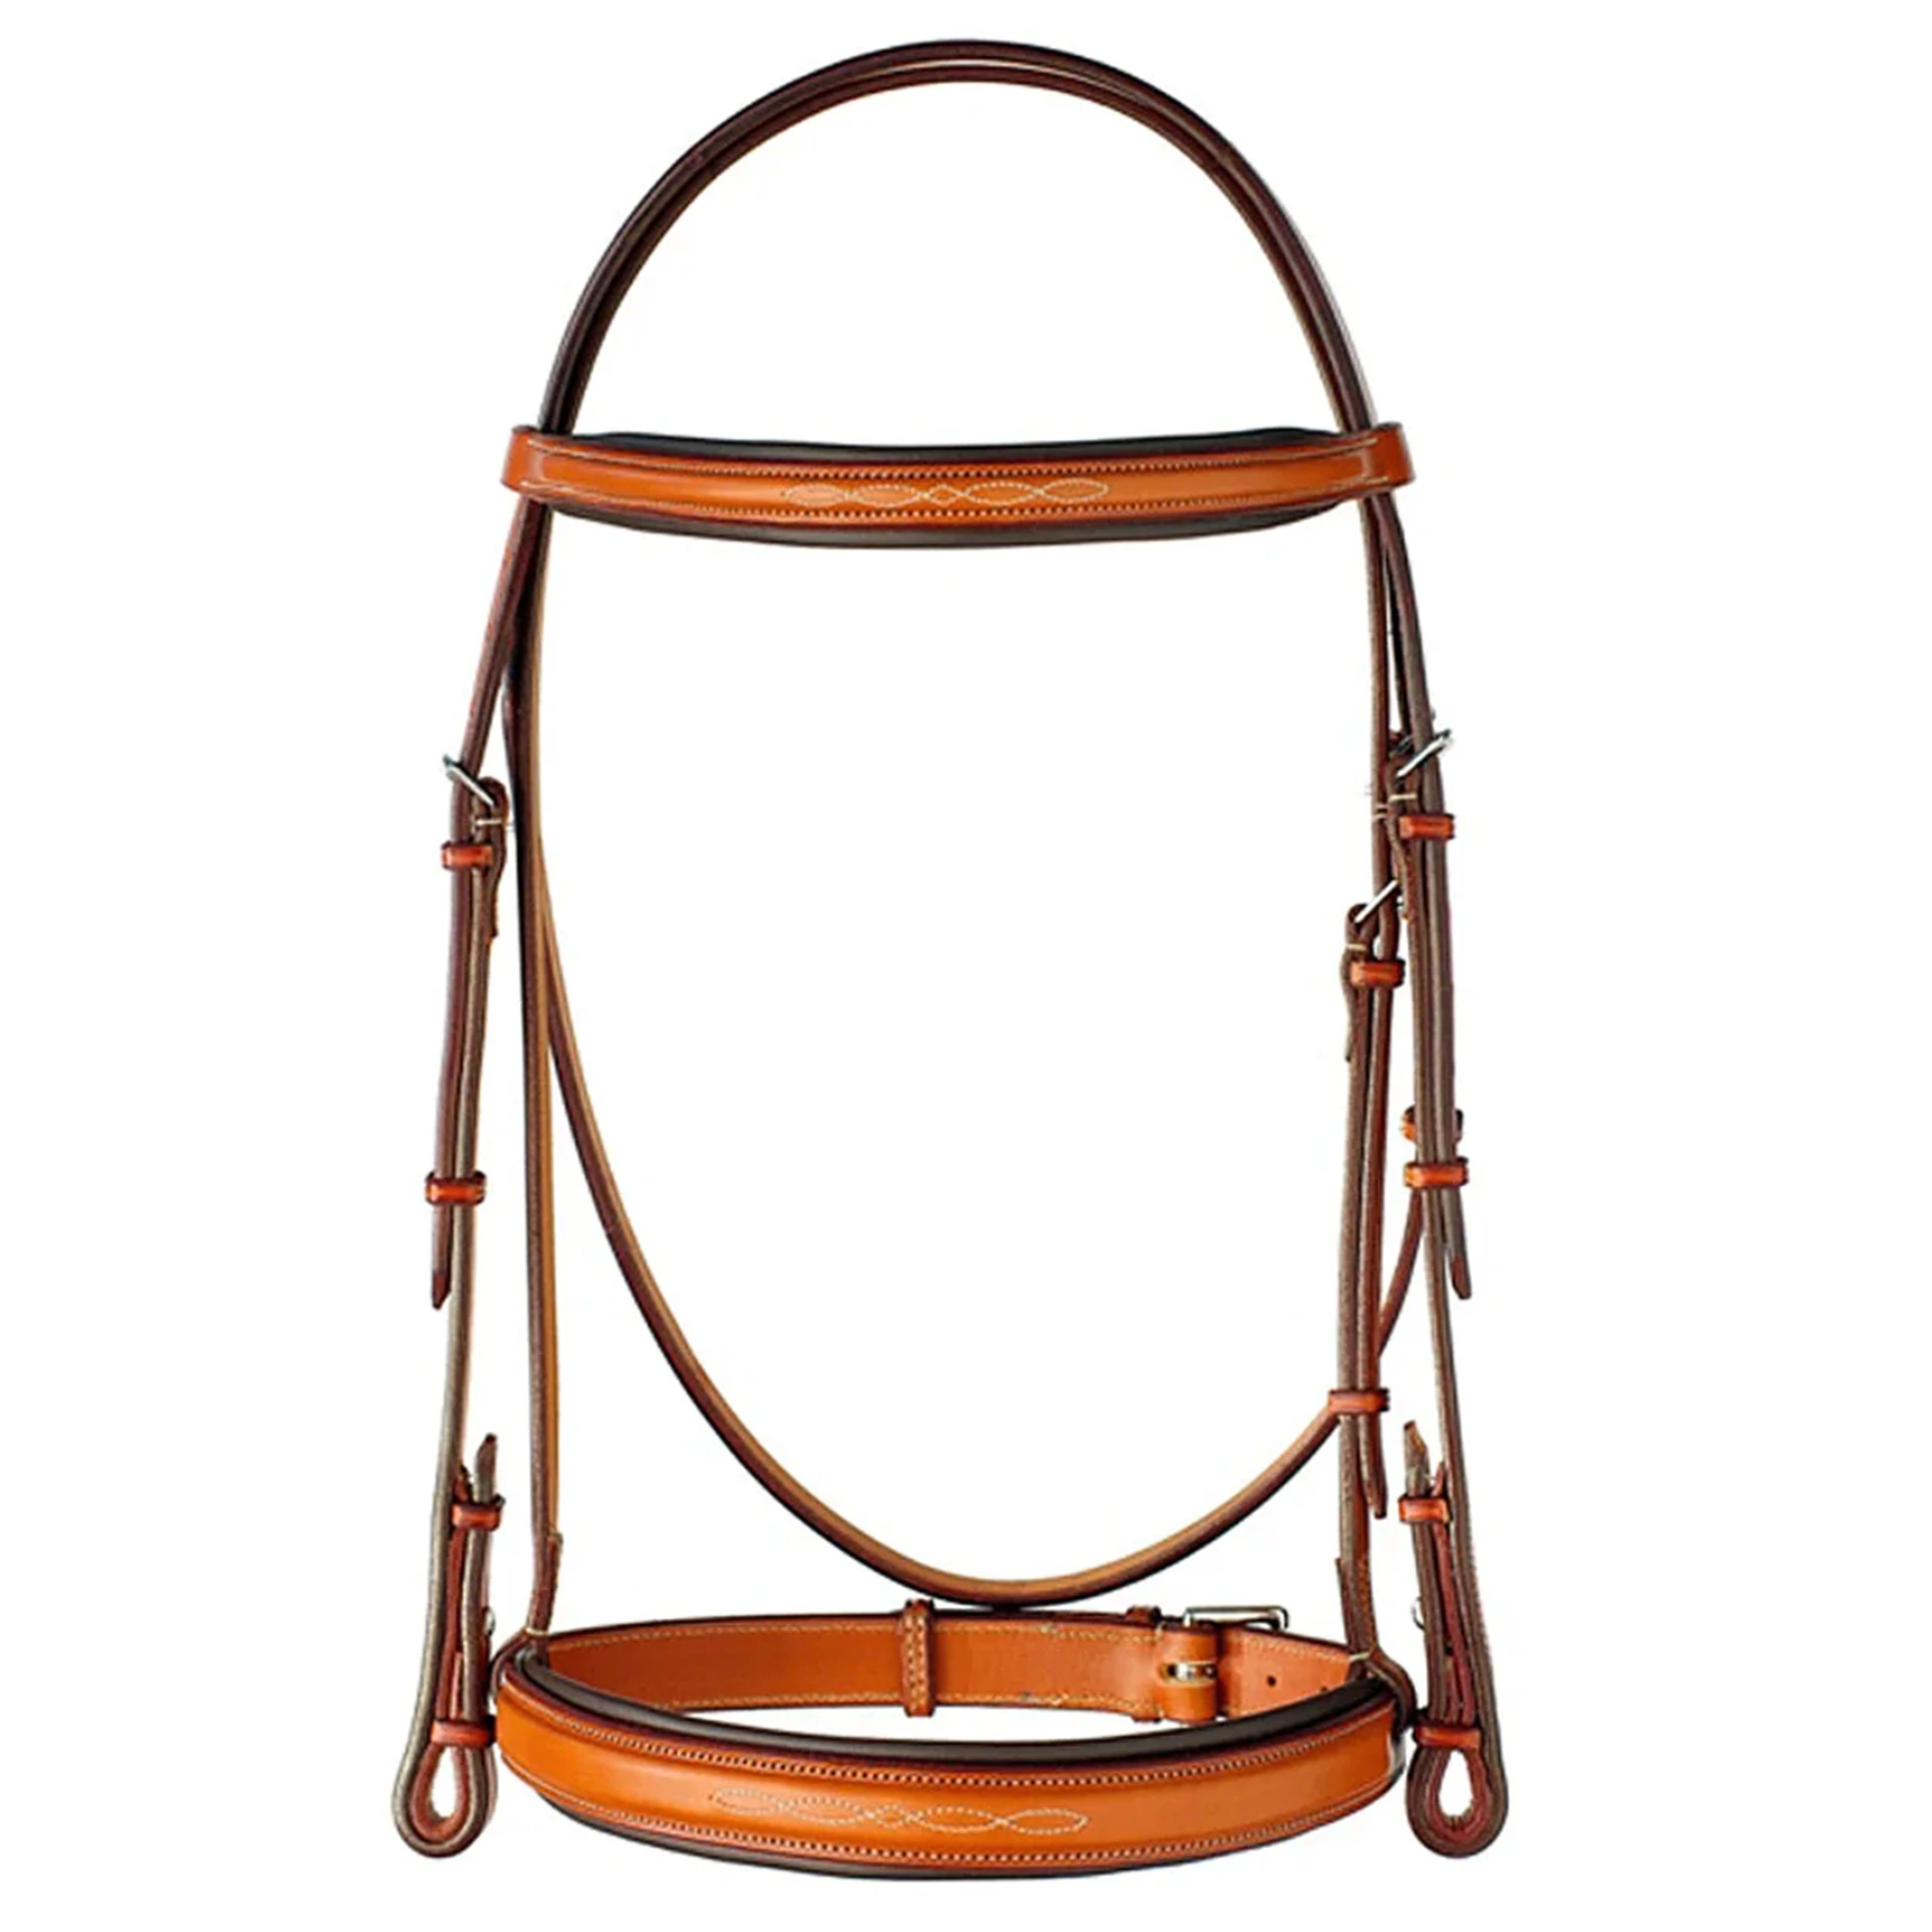 Edgewood Deluxe Padded 1" Bridle